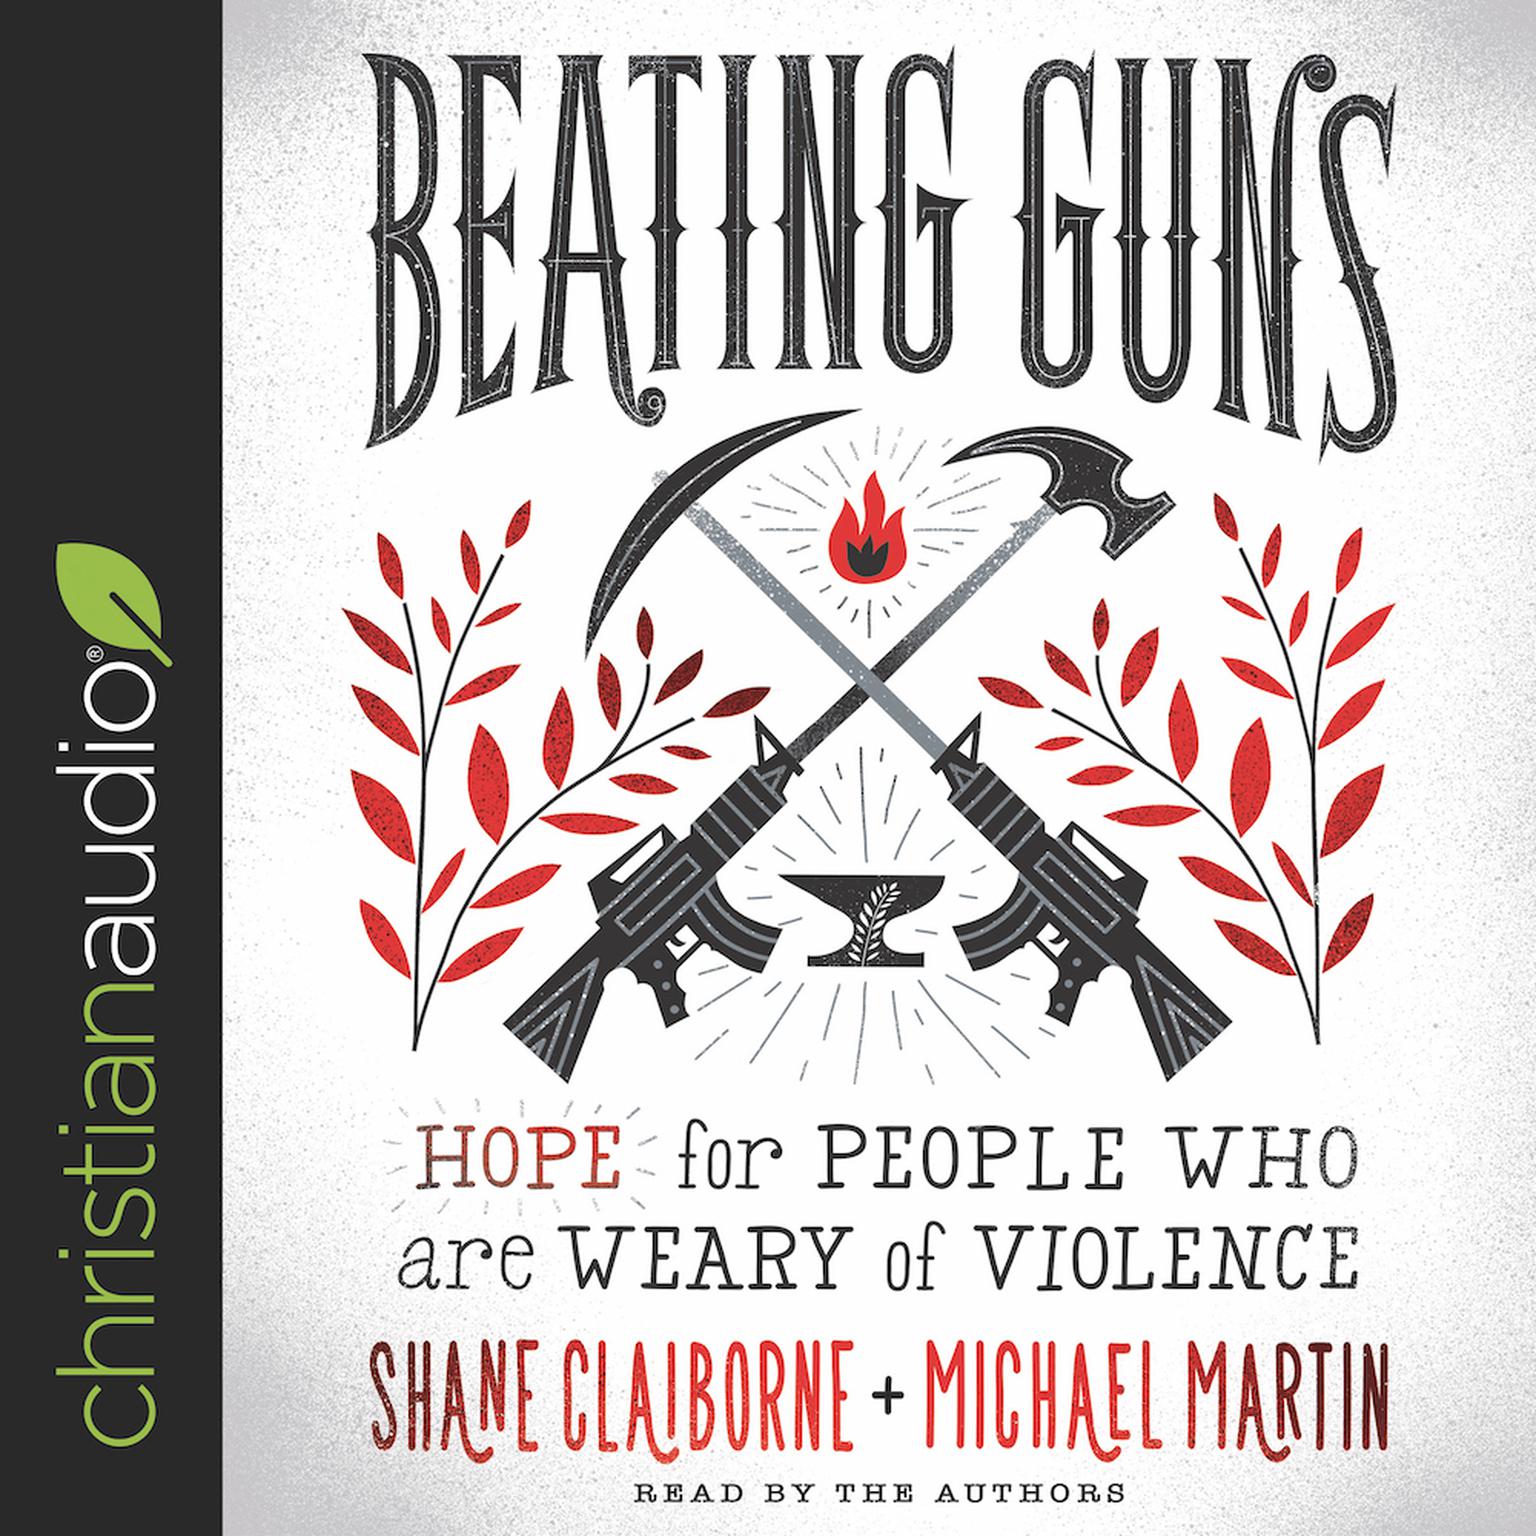 Beating Guns: Hope for People Who Are Weary of Violence Audiobook, by Shane Claiborne